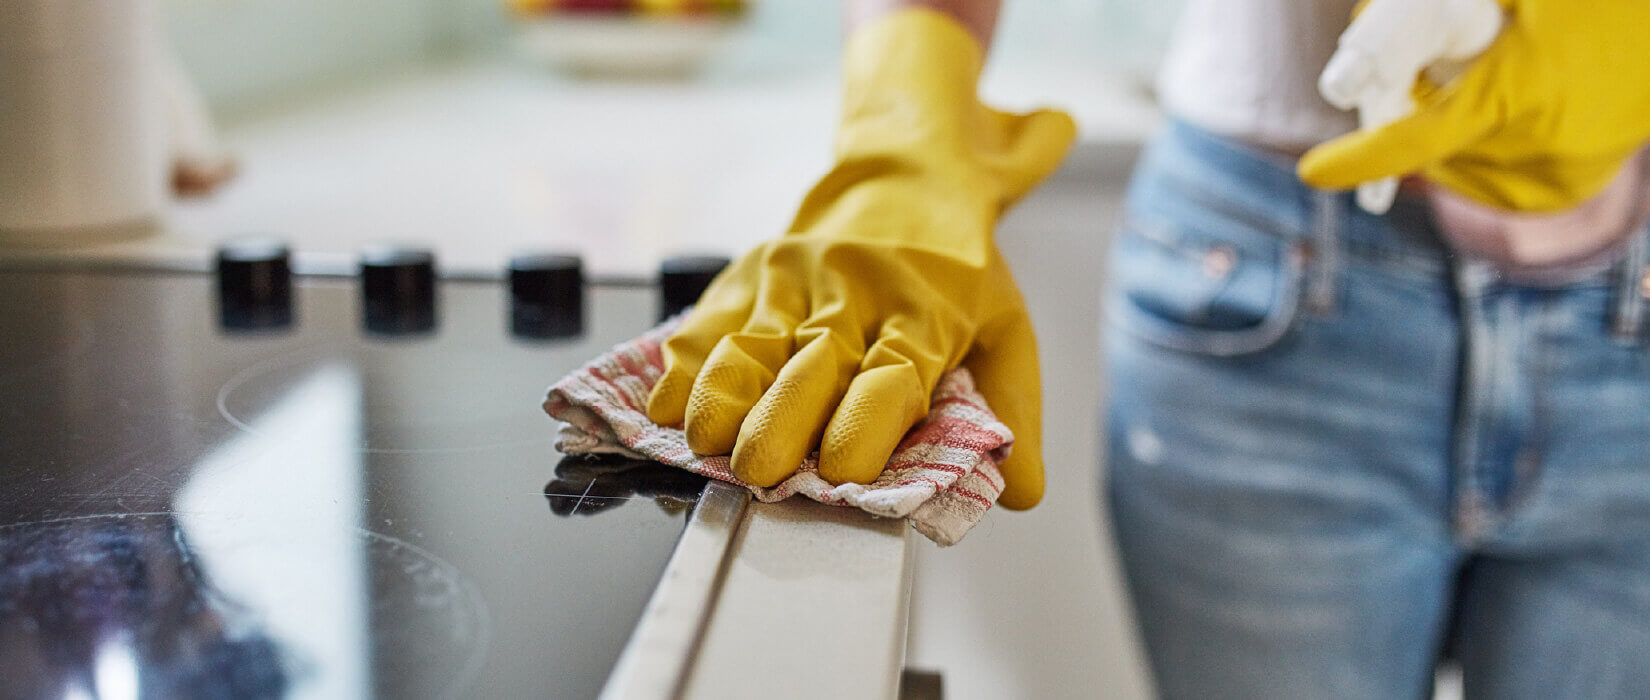 Women with yellow rubber gloves wiping stove top